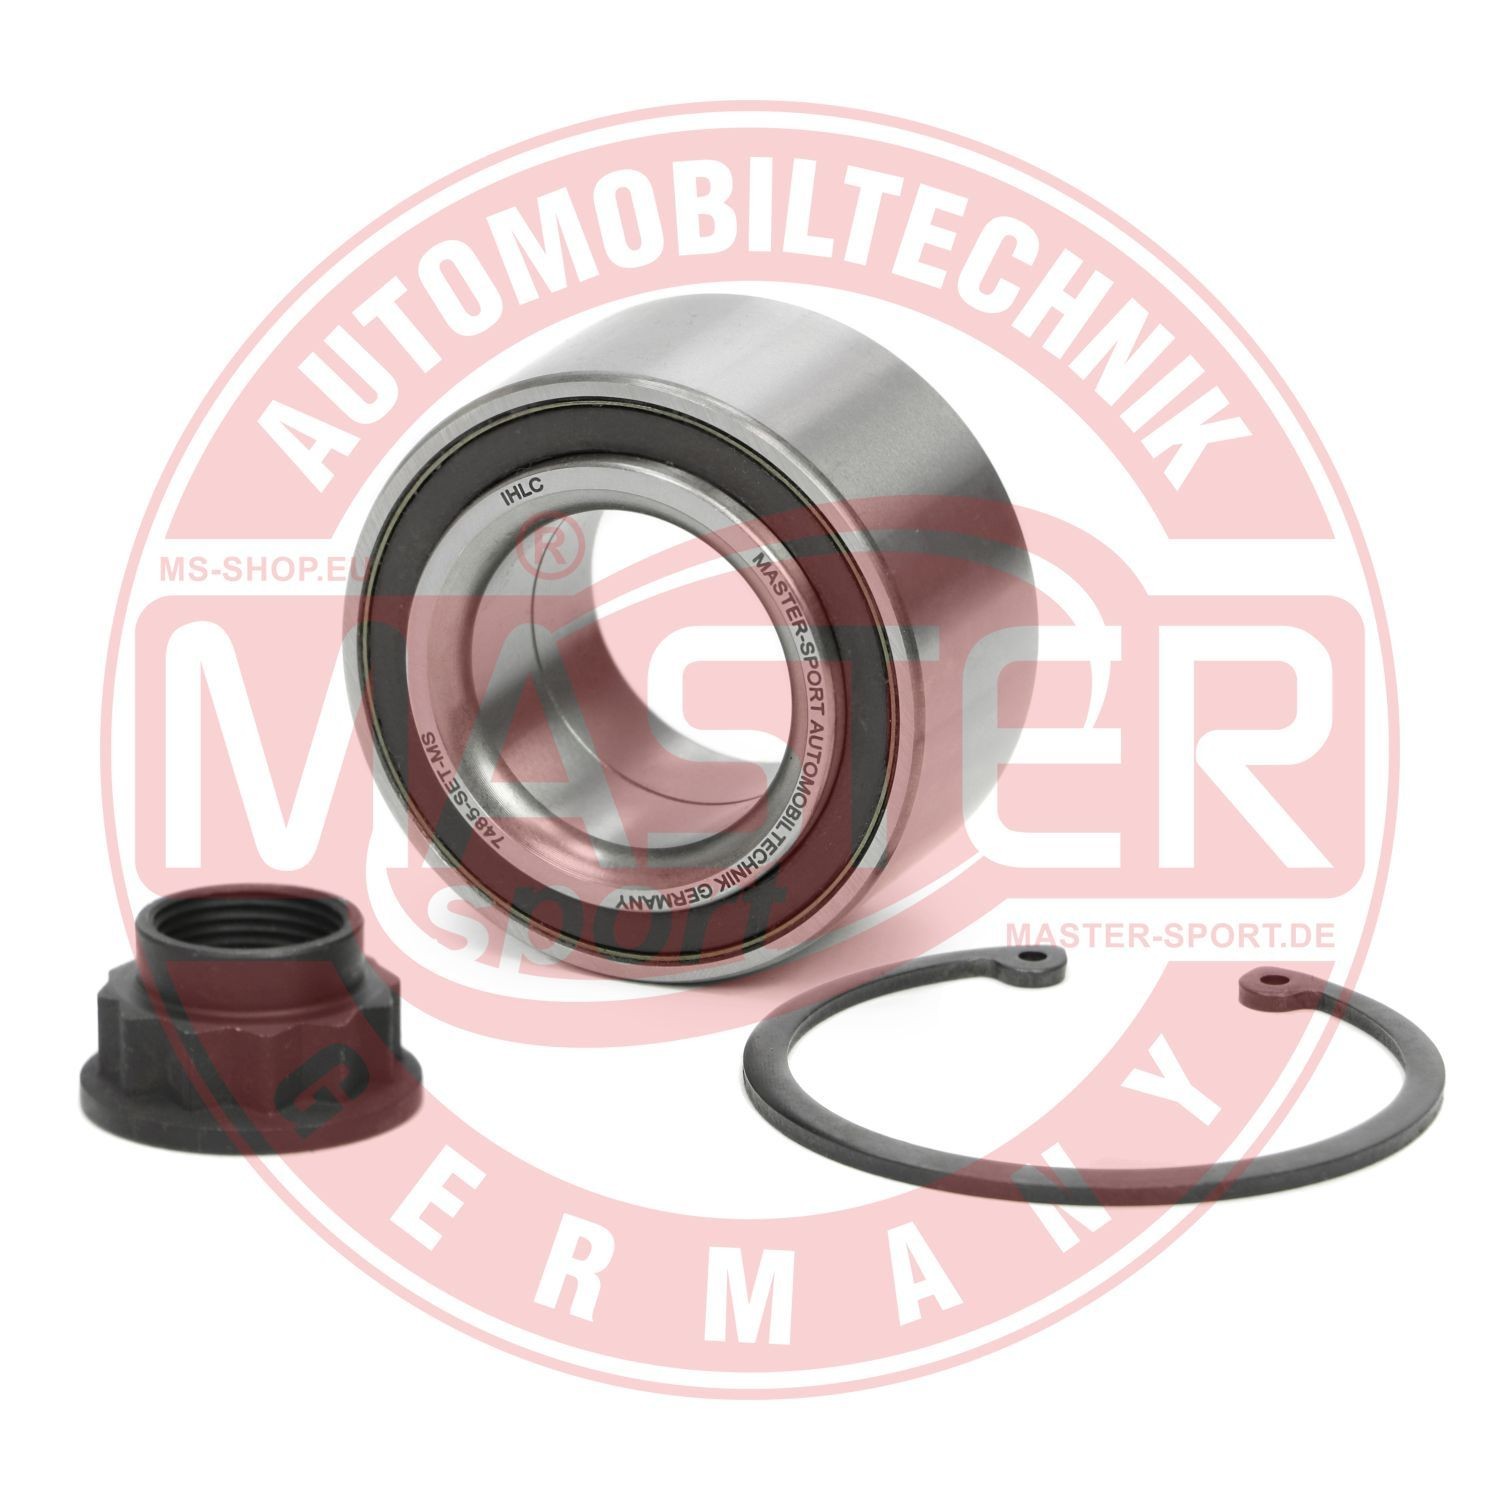 7485-SET-MS MASTER-SPORT Wheel bearings TOYOTA with integrated magnetic sensor ring, 69 mm